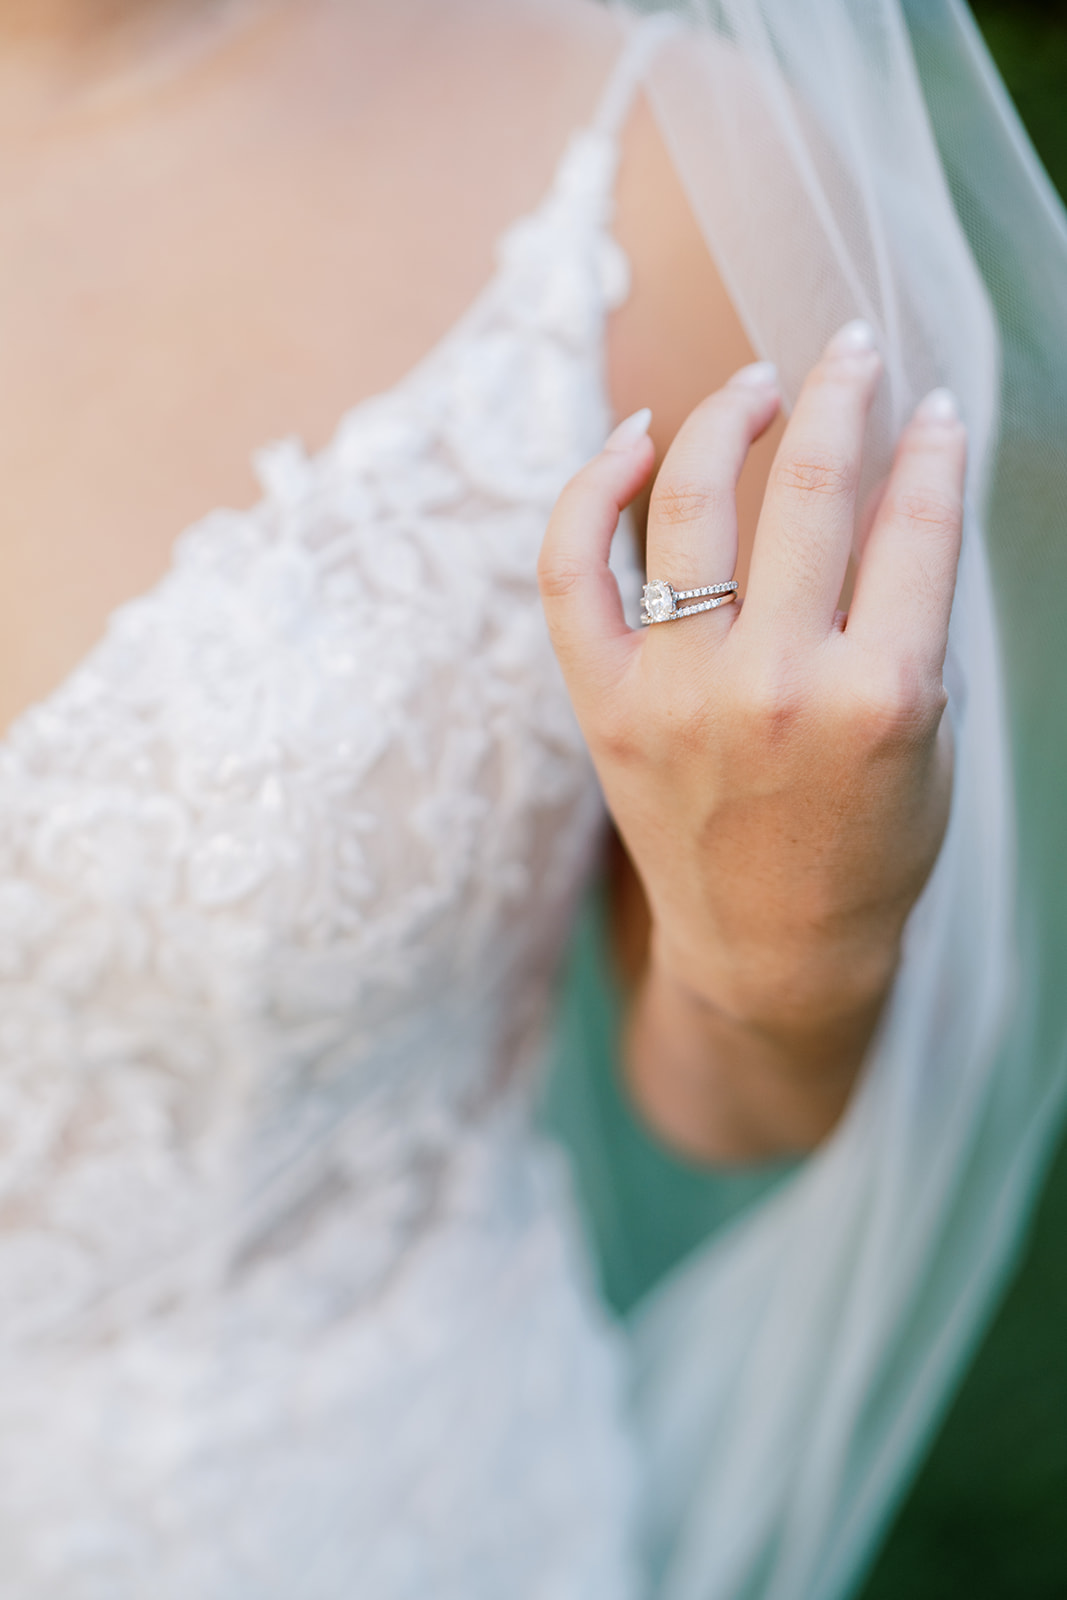 A bride with her wedding ring on her hand photo taken by Megan Moura Photography